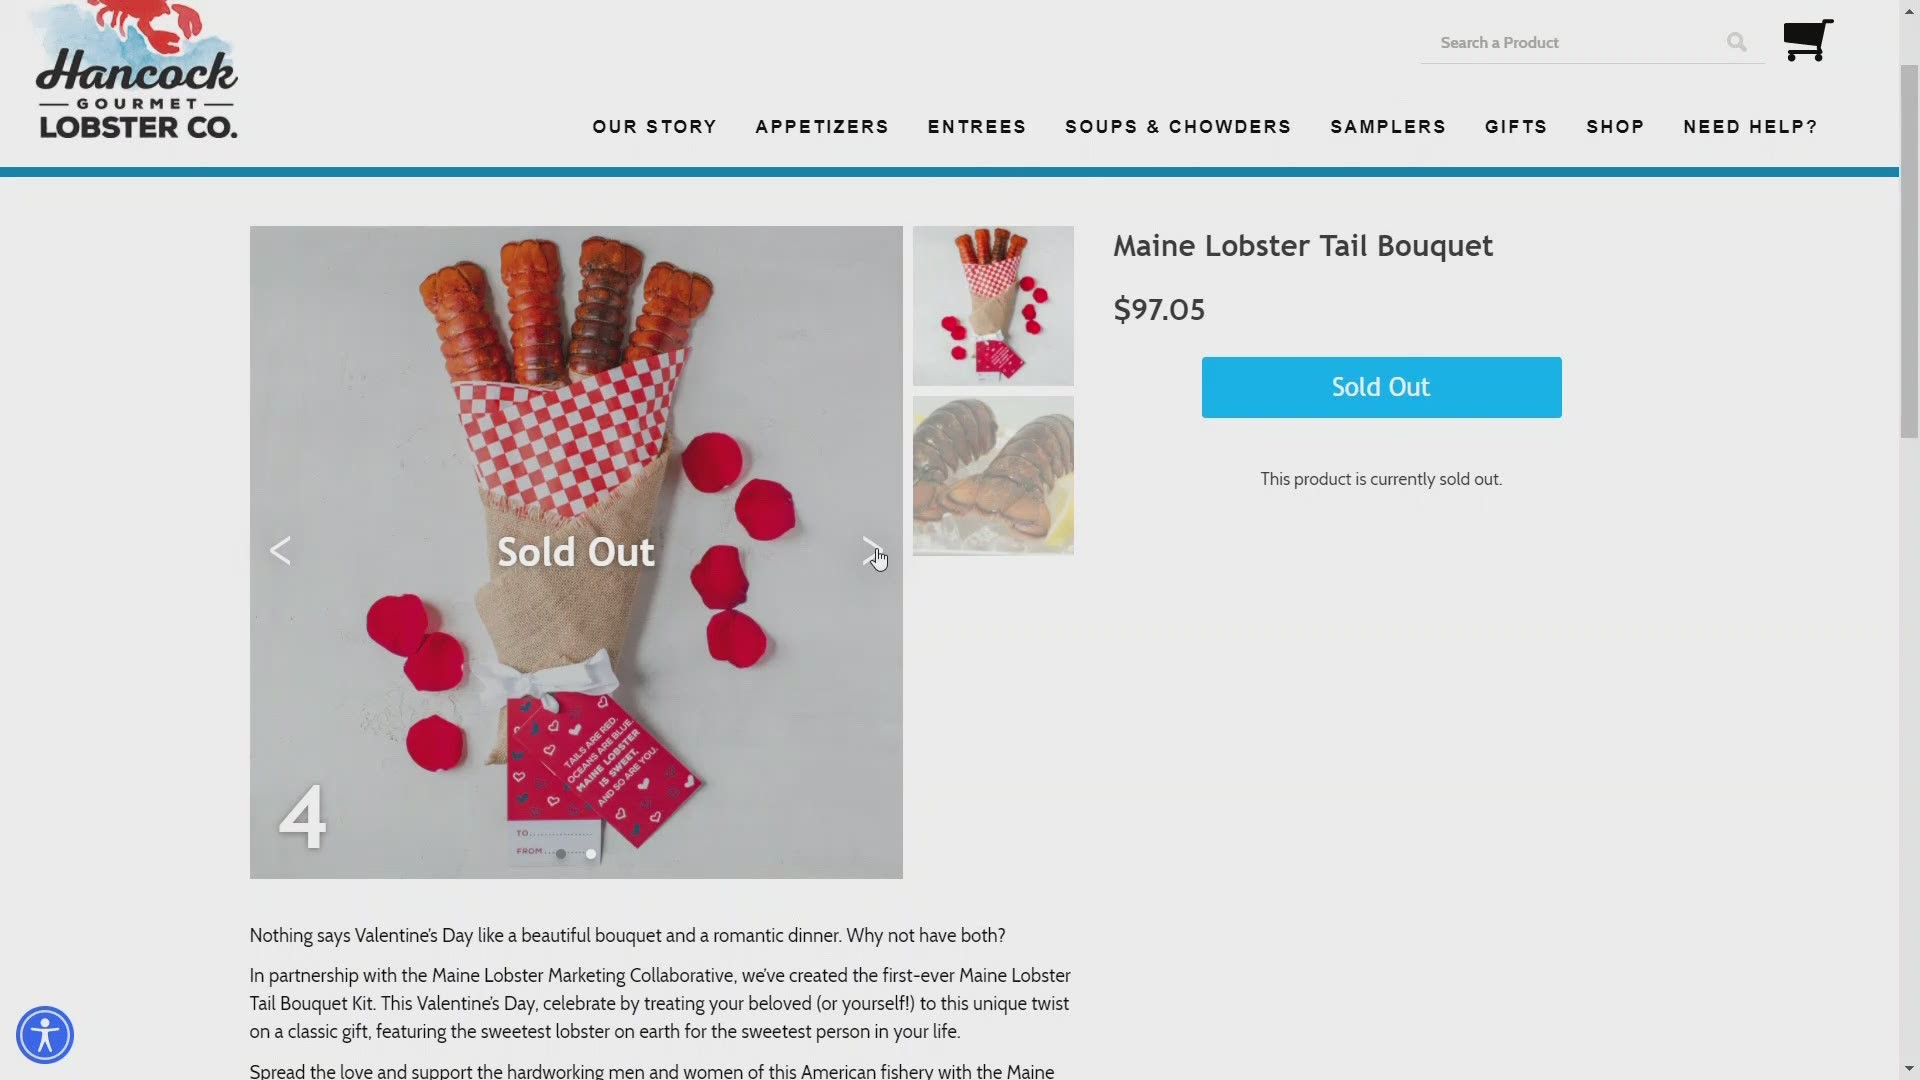 This is the first time Topsham based company, Hancock Gourmet has sold the Maine Lobster Tail Bouquet after partnering with the Maine Lobster Marketing Collaborative